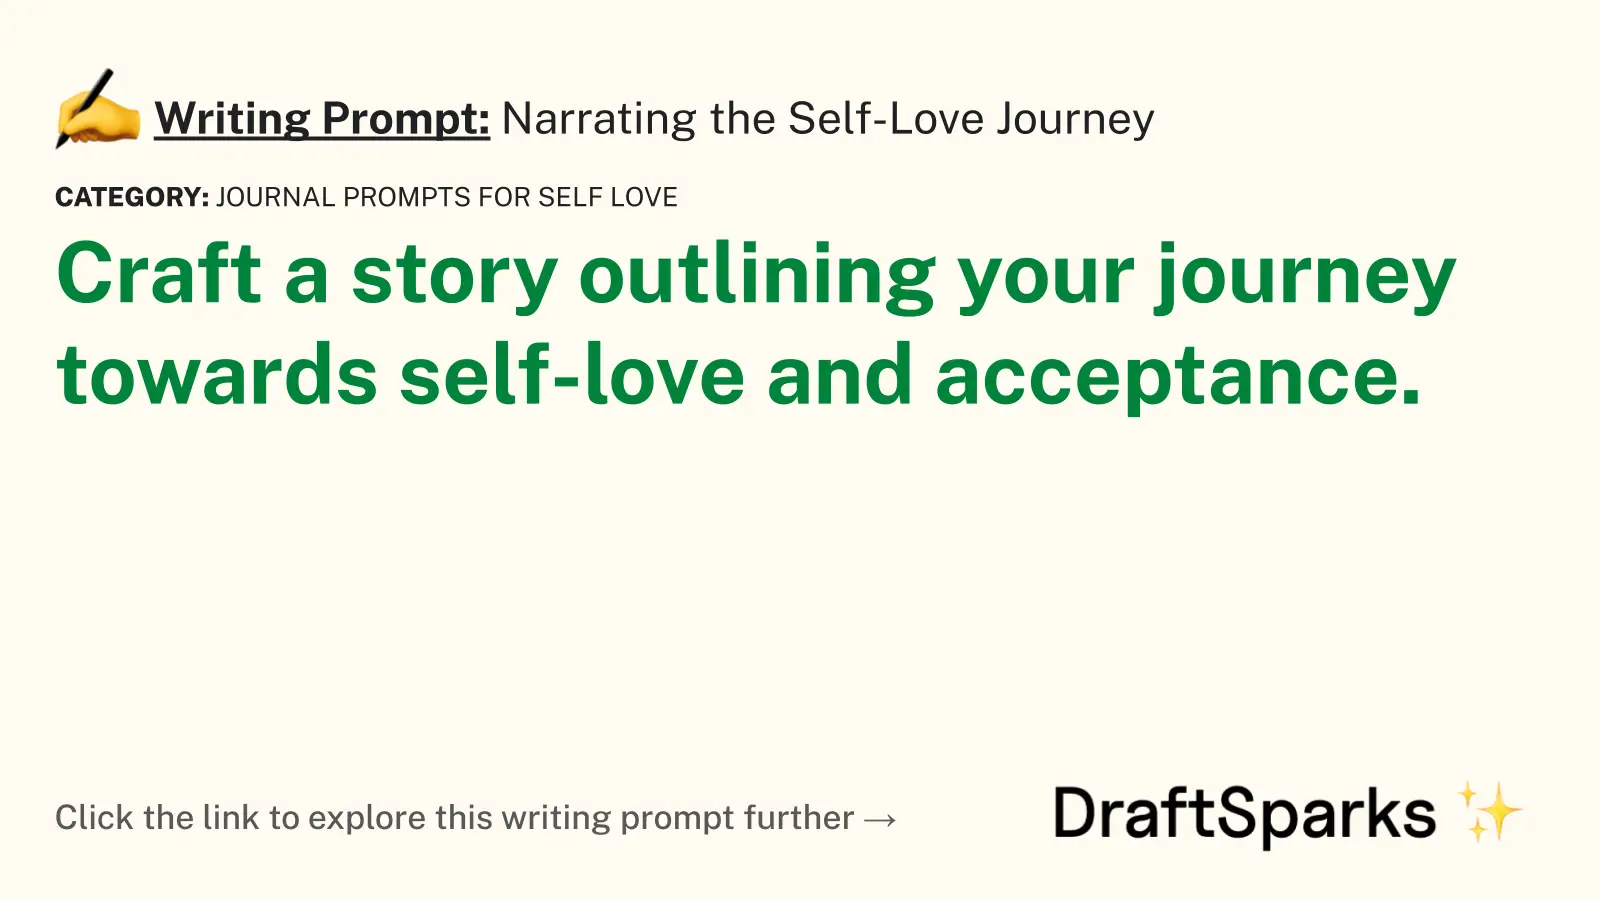 Narrating the Self-Love Journey